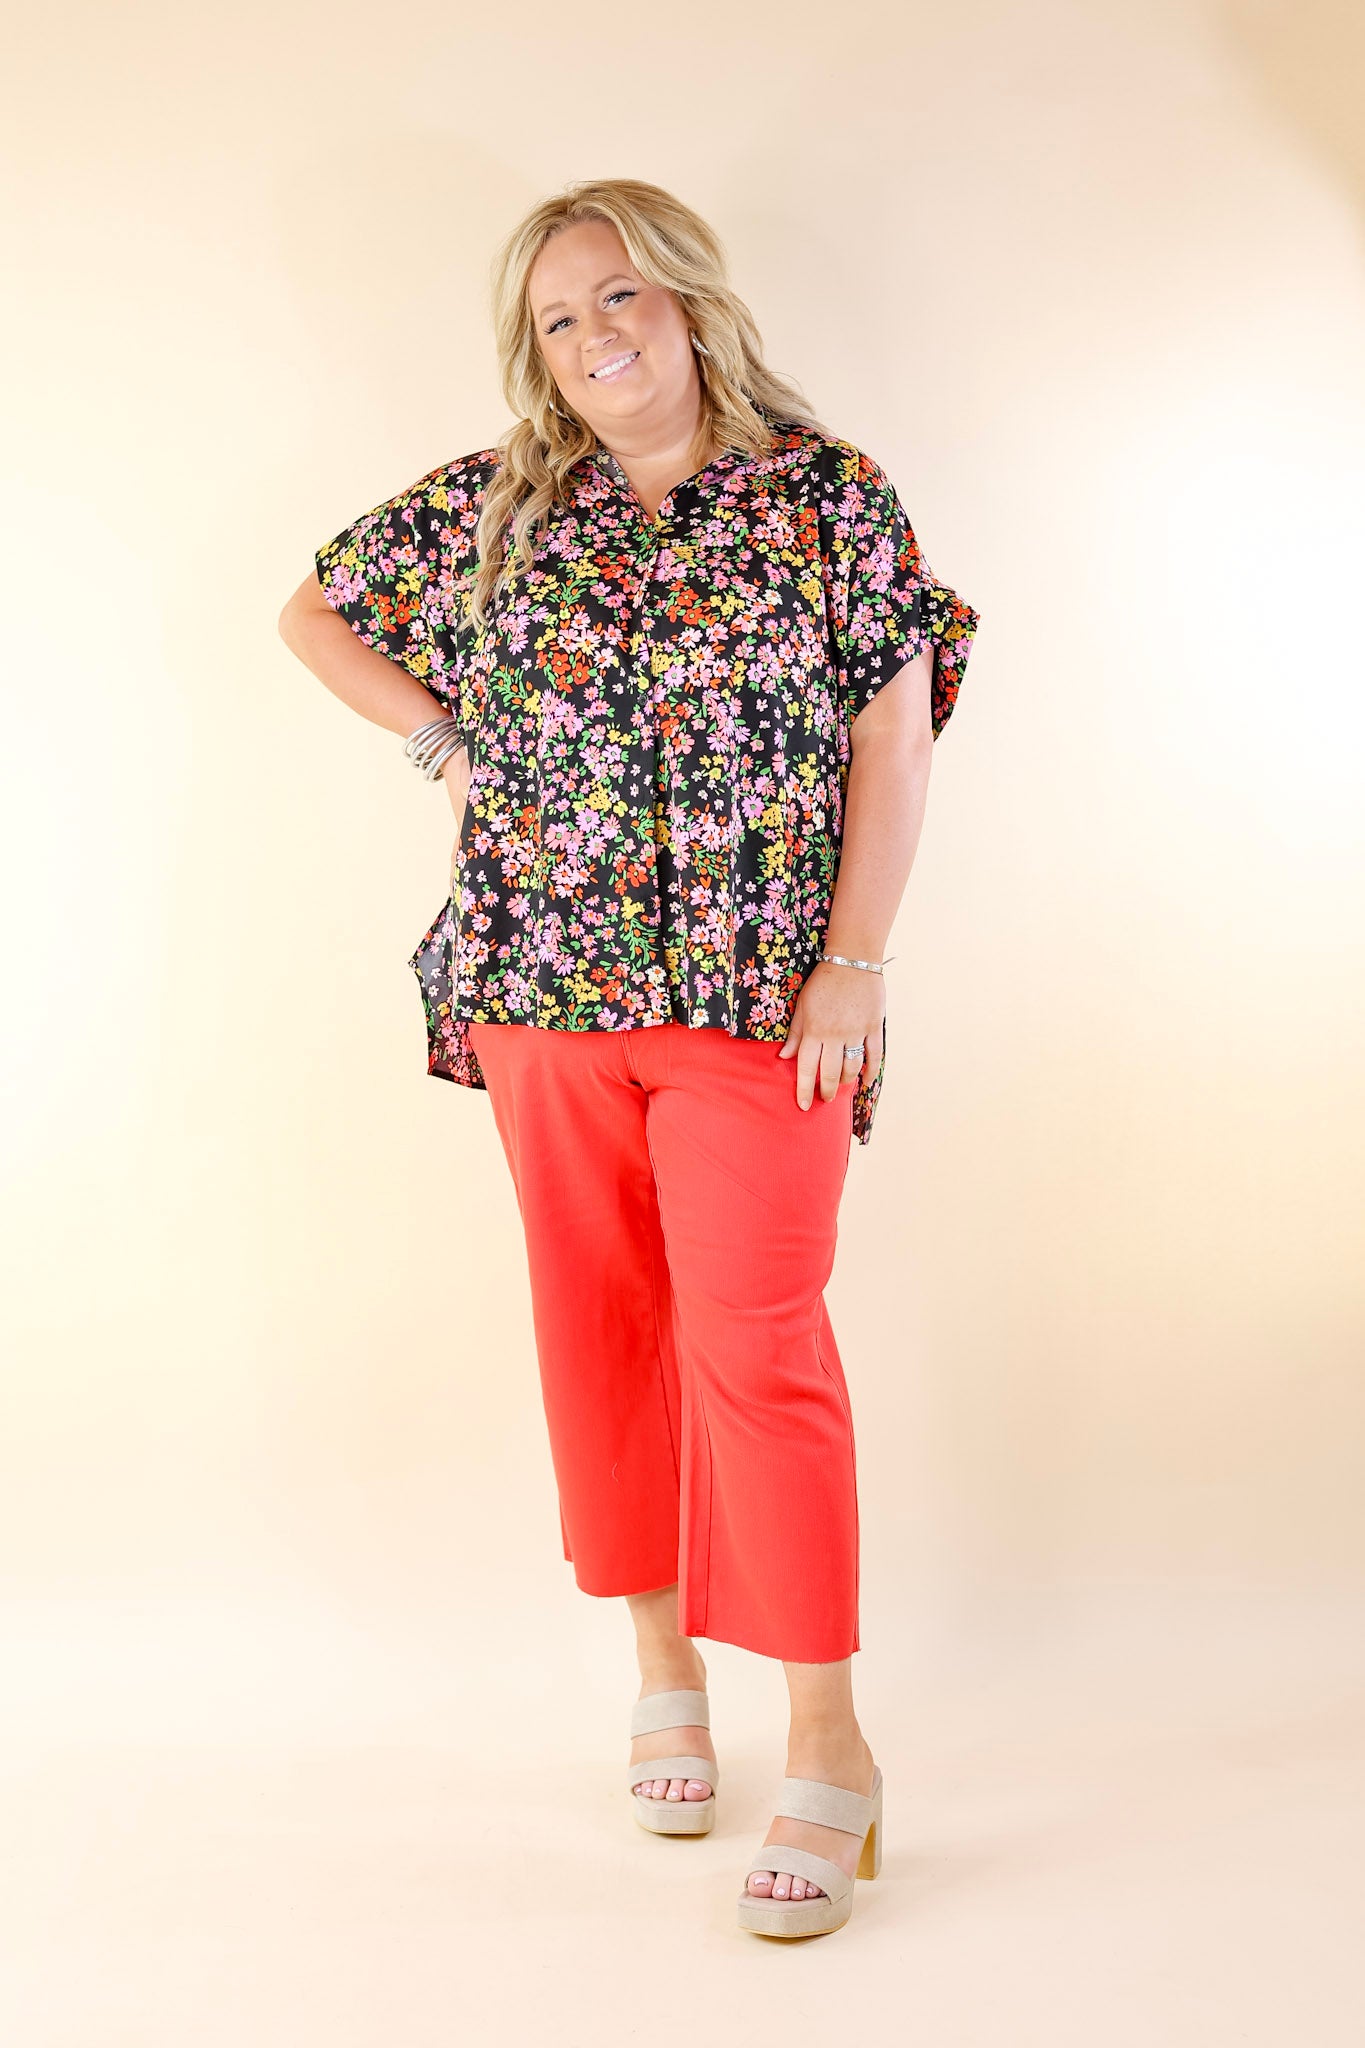 Adventure Awaits Floral Print Top with Collar in Black - Giddy Up Glamour Boutique